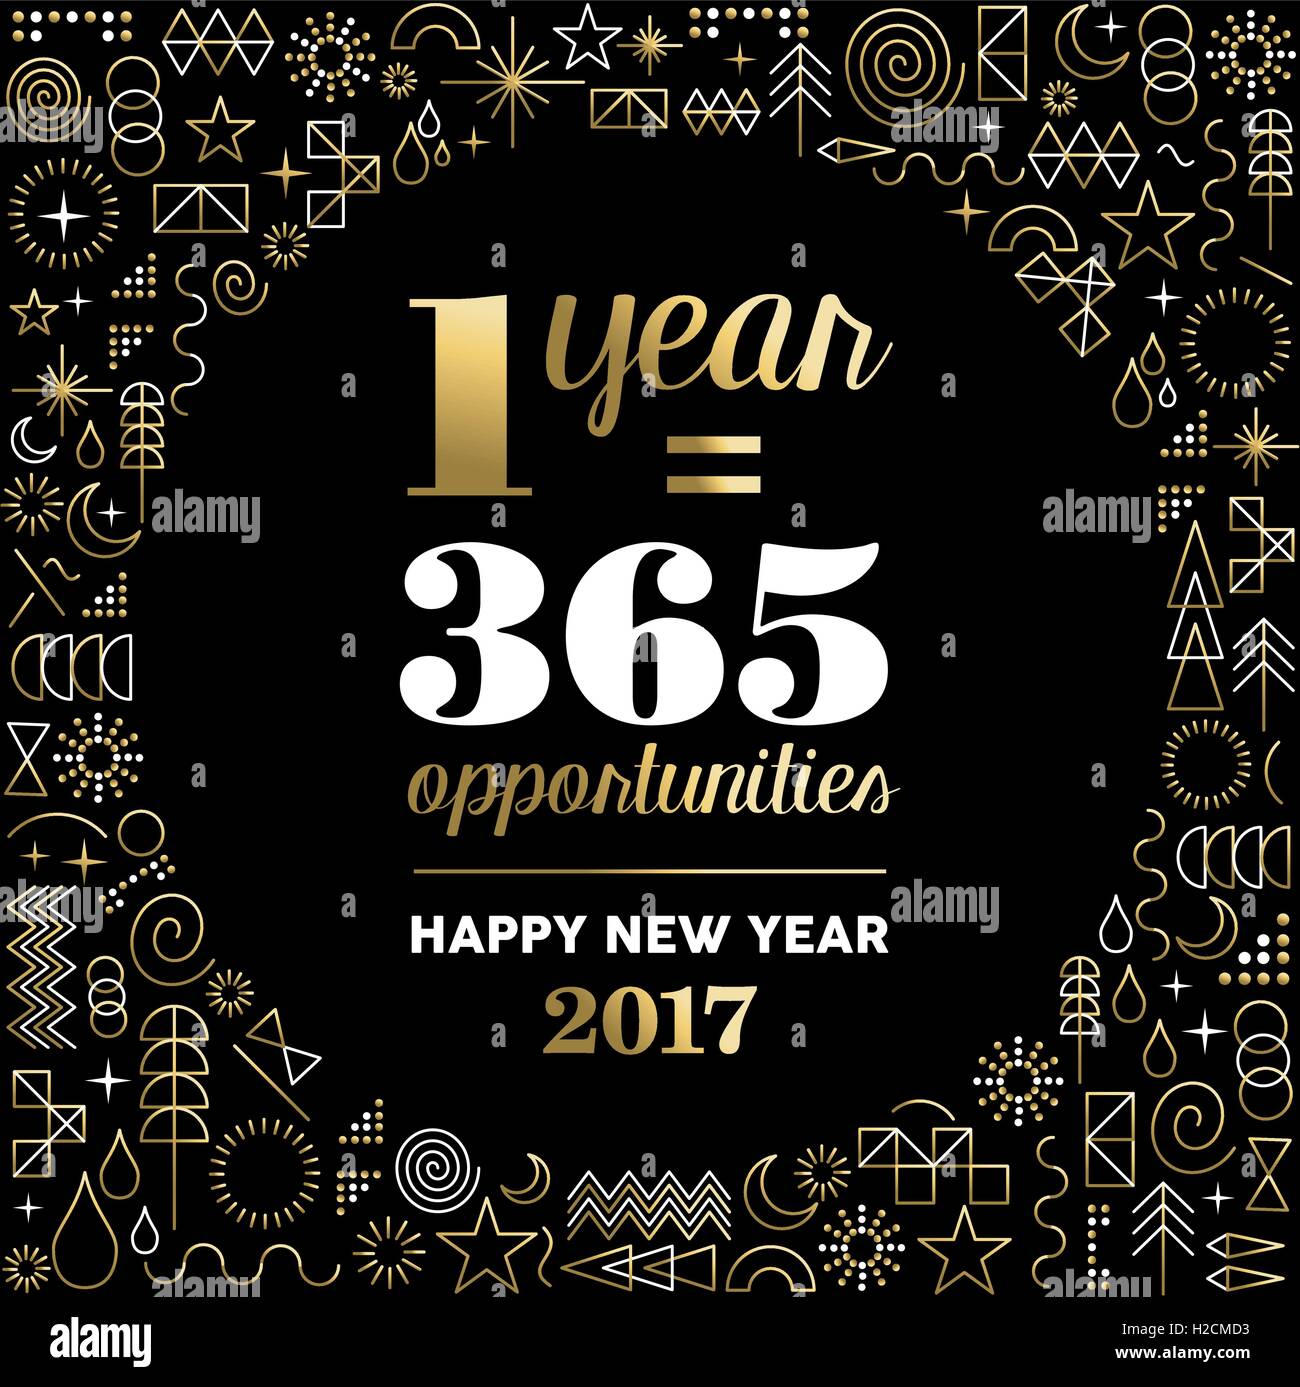 Happy new year 2017 gold design with motivational text quote for inspiration and line art icons background. EPS10 vector. Stock Vector